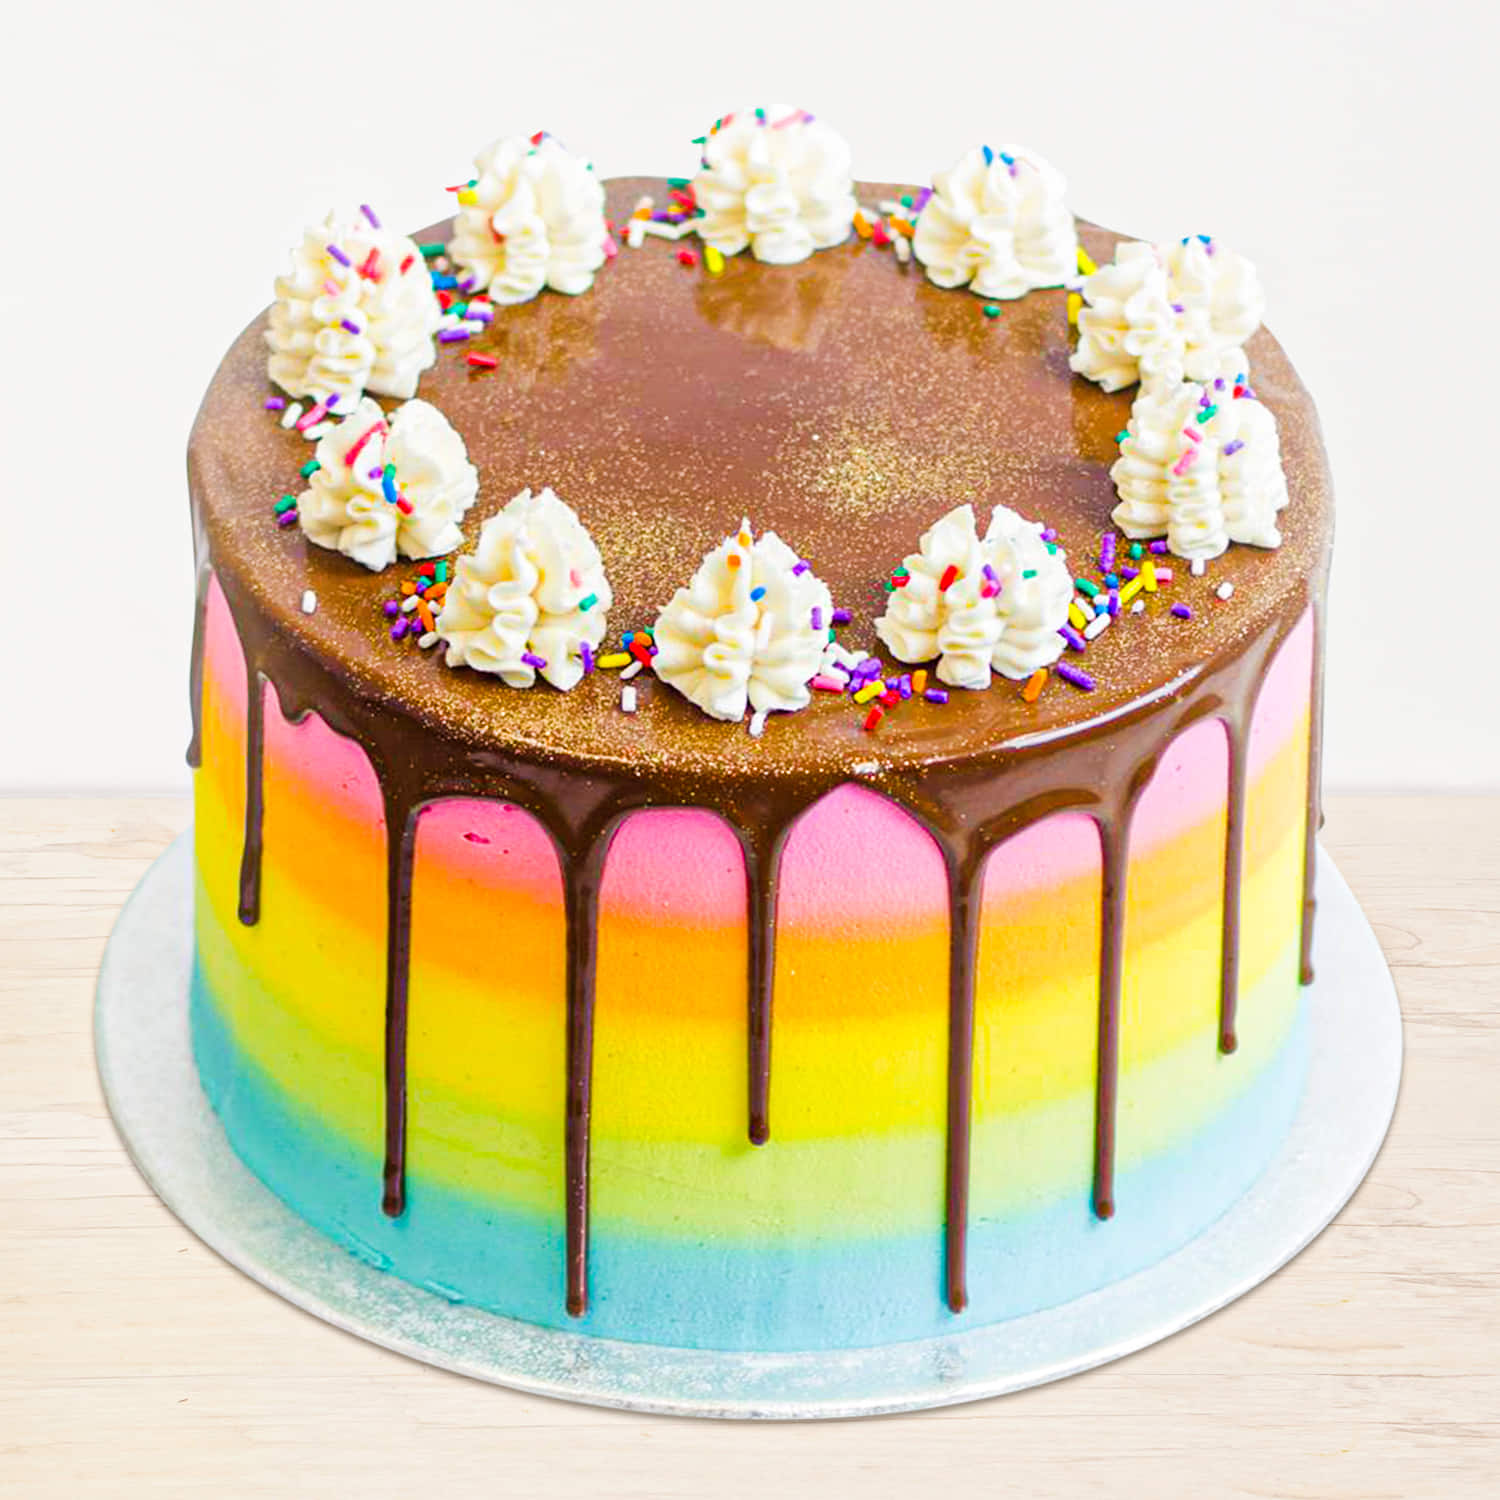 Order online through these cake delivery spots in Delhi